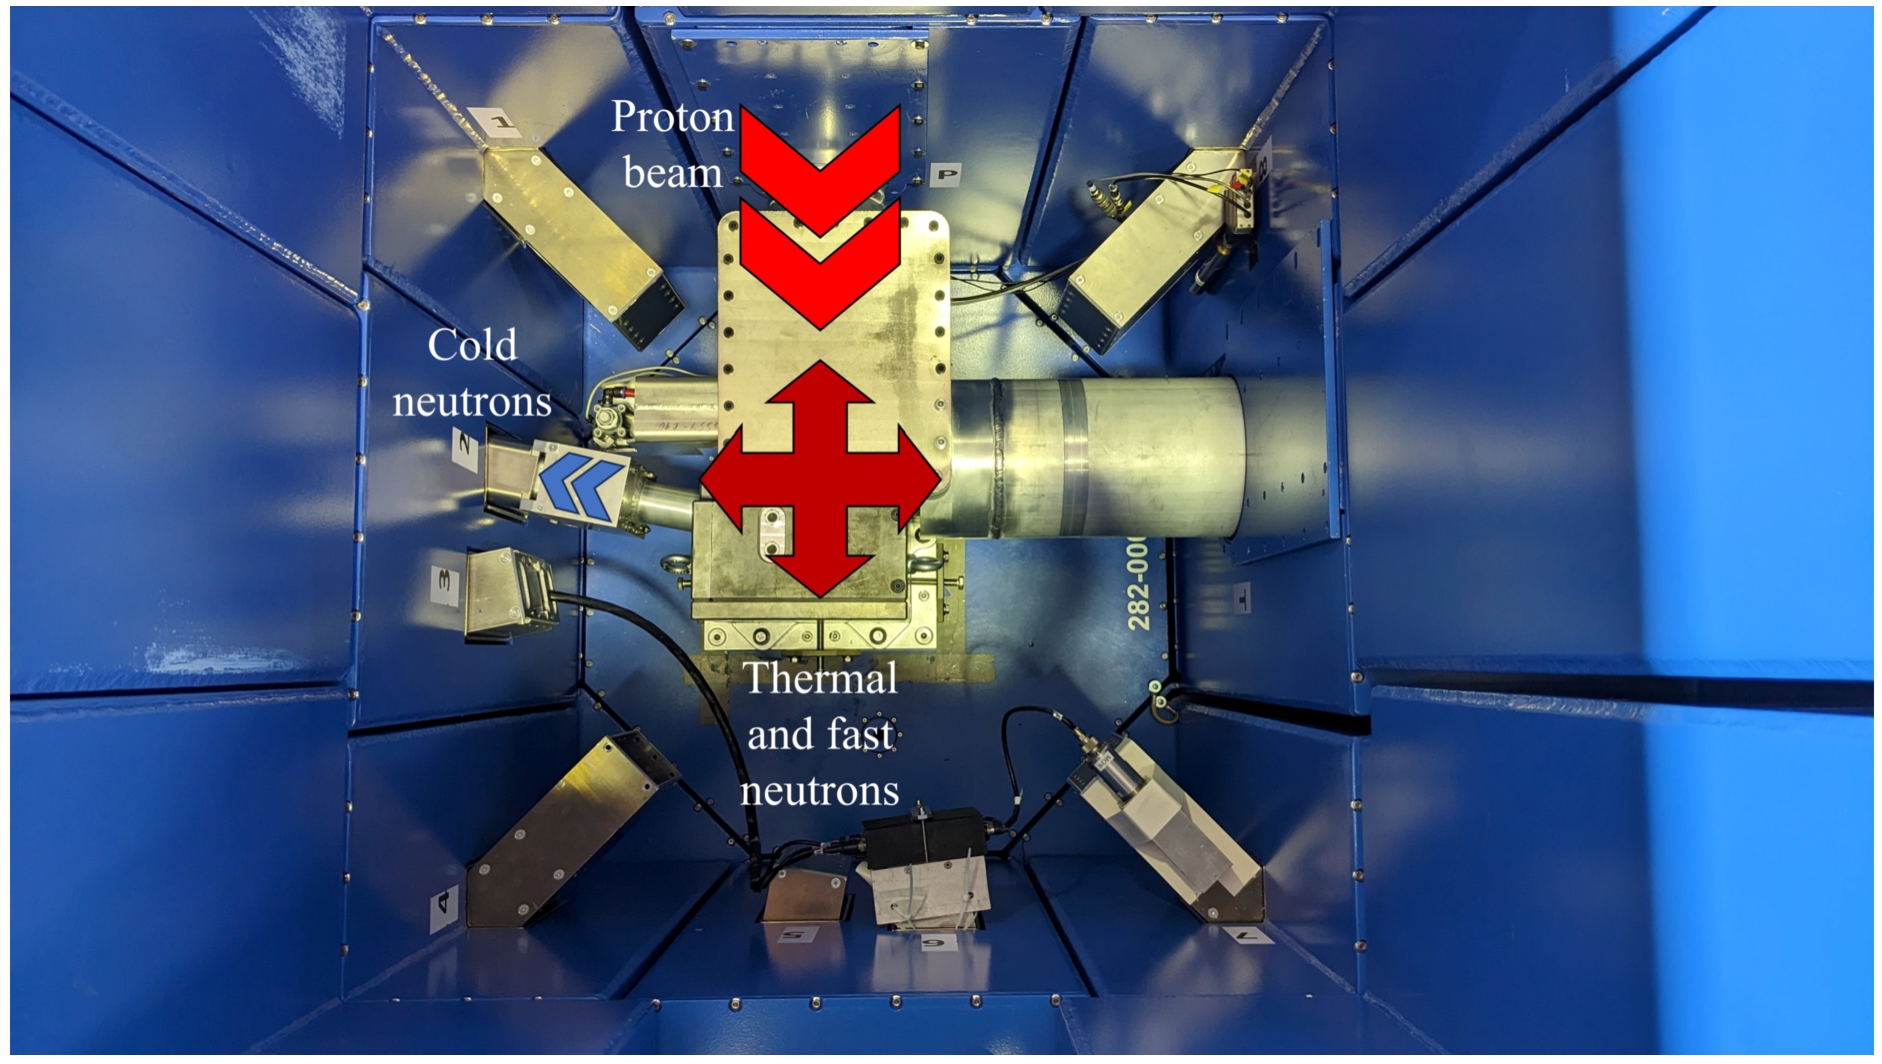 Target–Moderator–Reflector (TMR) area seen from above. Protons are coming from top. Cold neutrons moderated in the solid methane are extracted from beamline number 2.